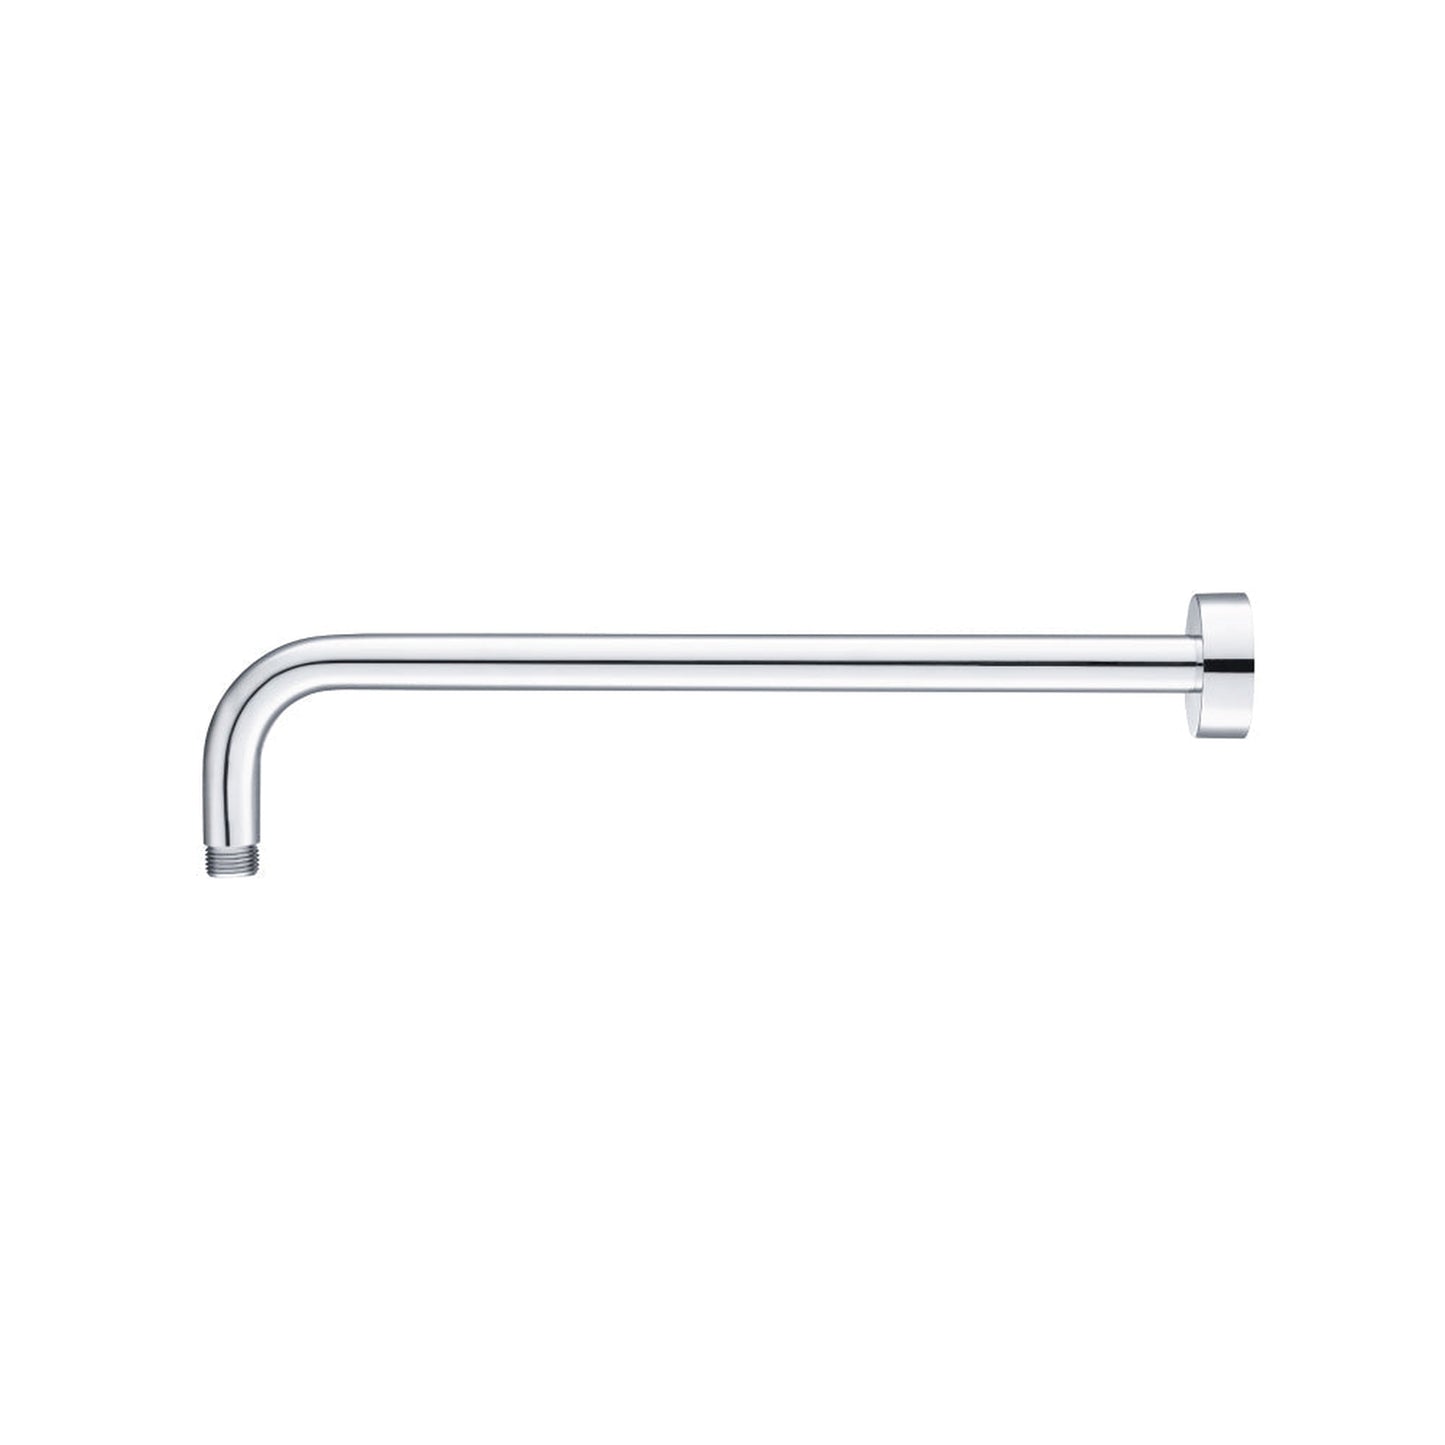 Isenberg Universal Fixtures 16" Chrome Solid Brass Wall-Mounted Shower Arm With J-Shape Extension and Round Sliding Flange